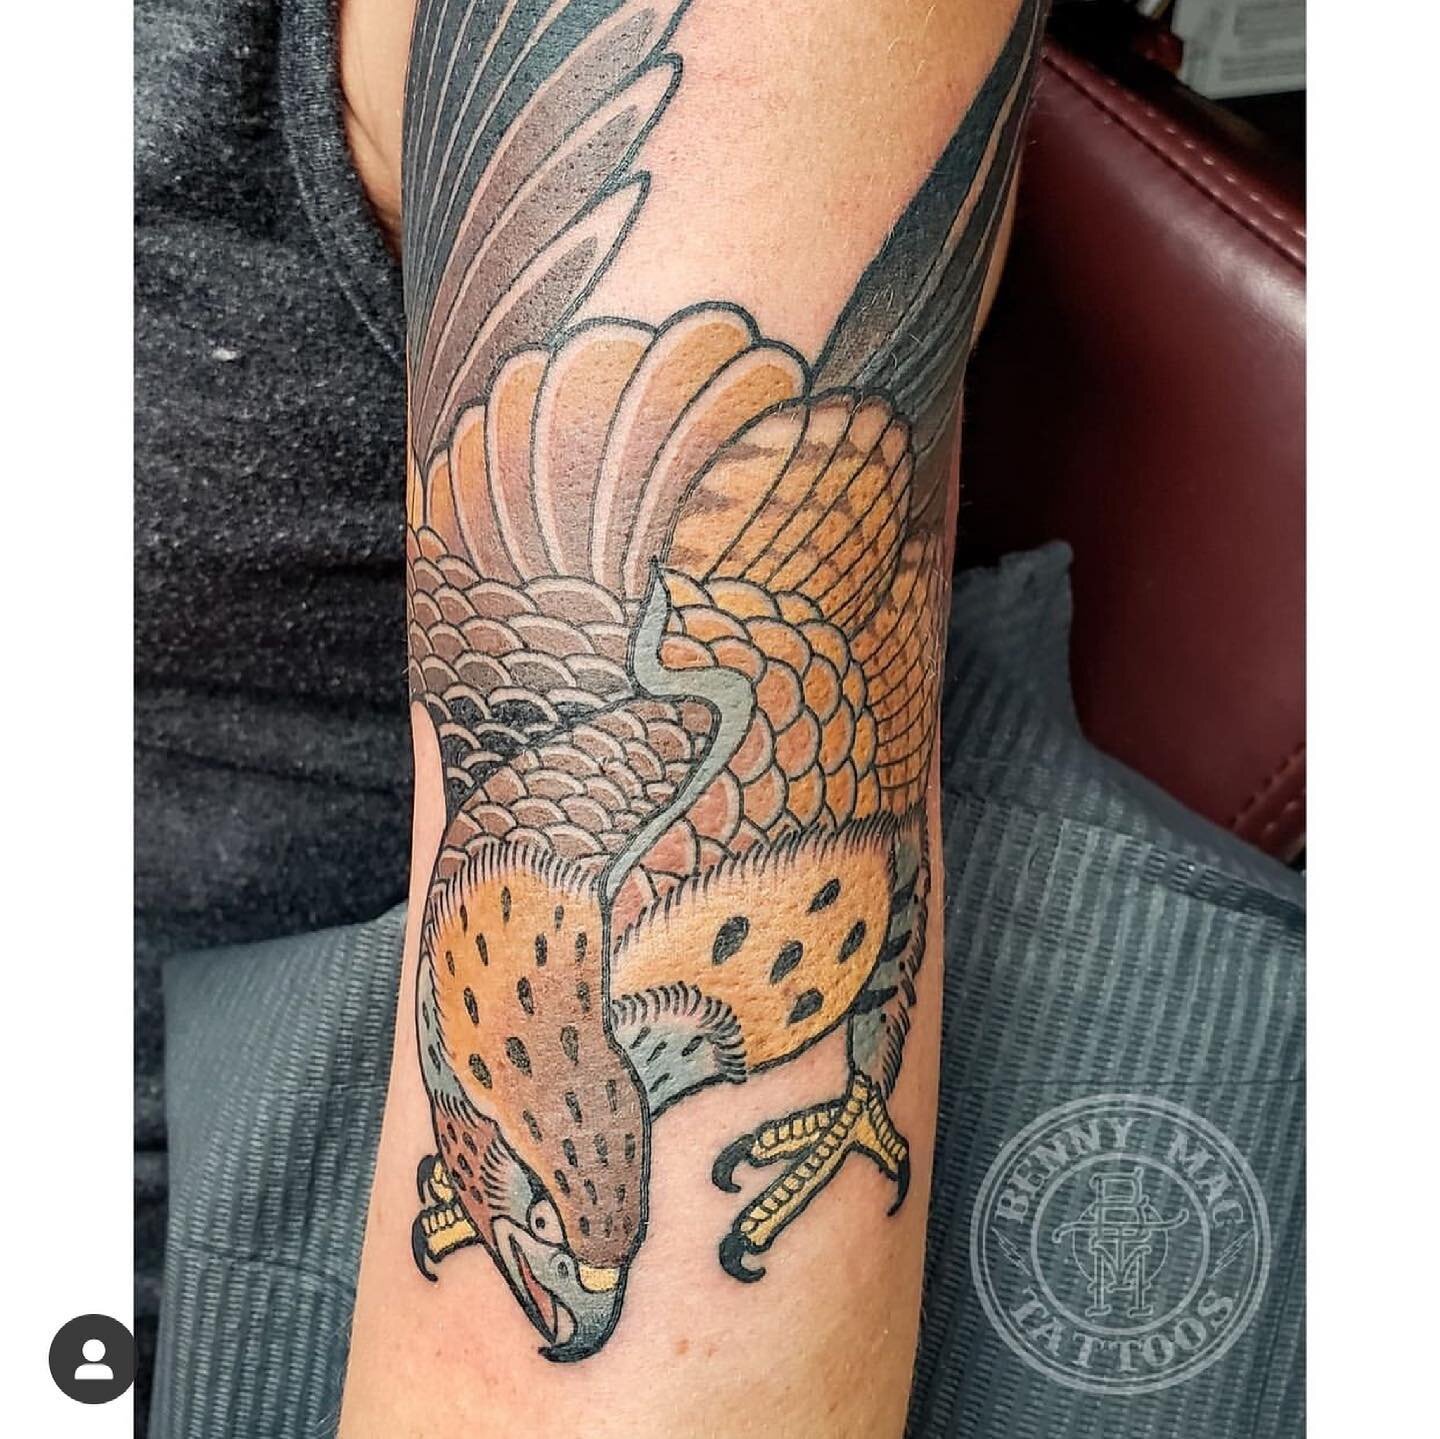 Red tailed hawk done by @bennymactattoos 
*
For all bookings email preferred, bennymactattoos@gmail.com
*
#bennymactattoos #boldandbeautiful #bold_will_hold #skinartmag #vink #visibleink #boston #bostonartist #bostontattoo #neotraditionaltattoo #neot